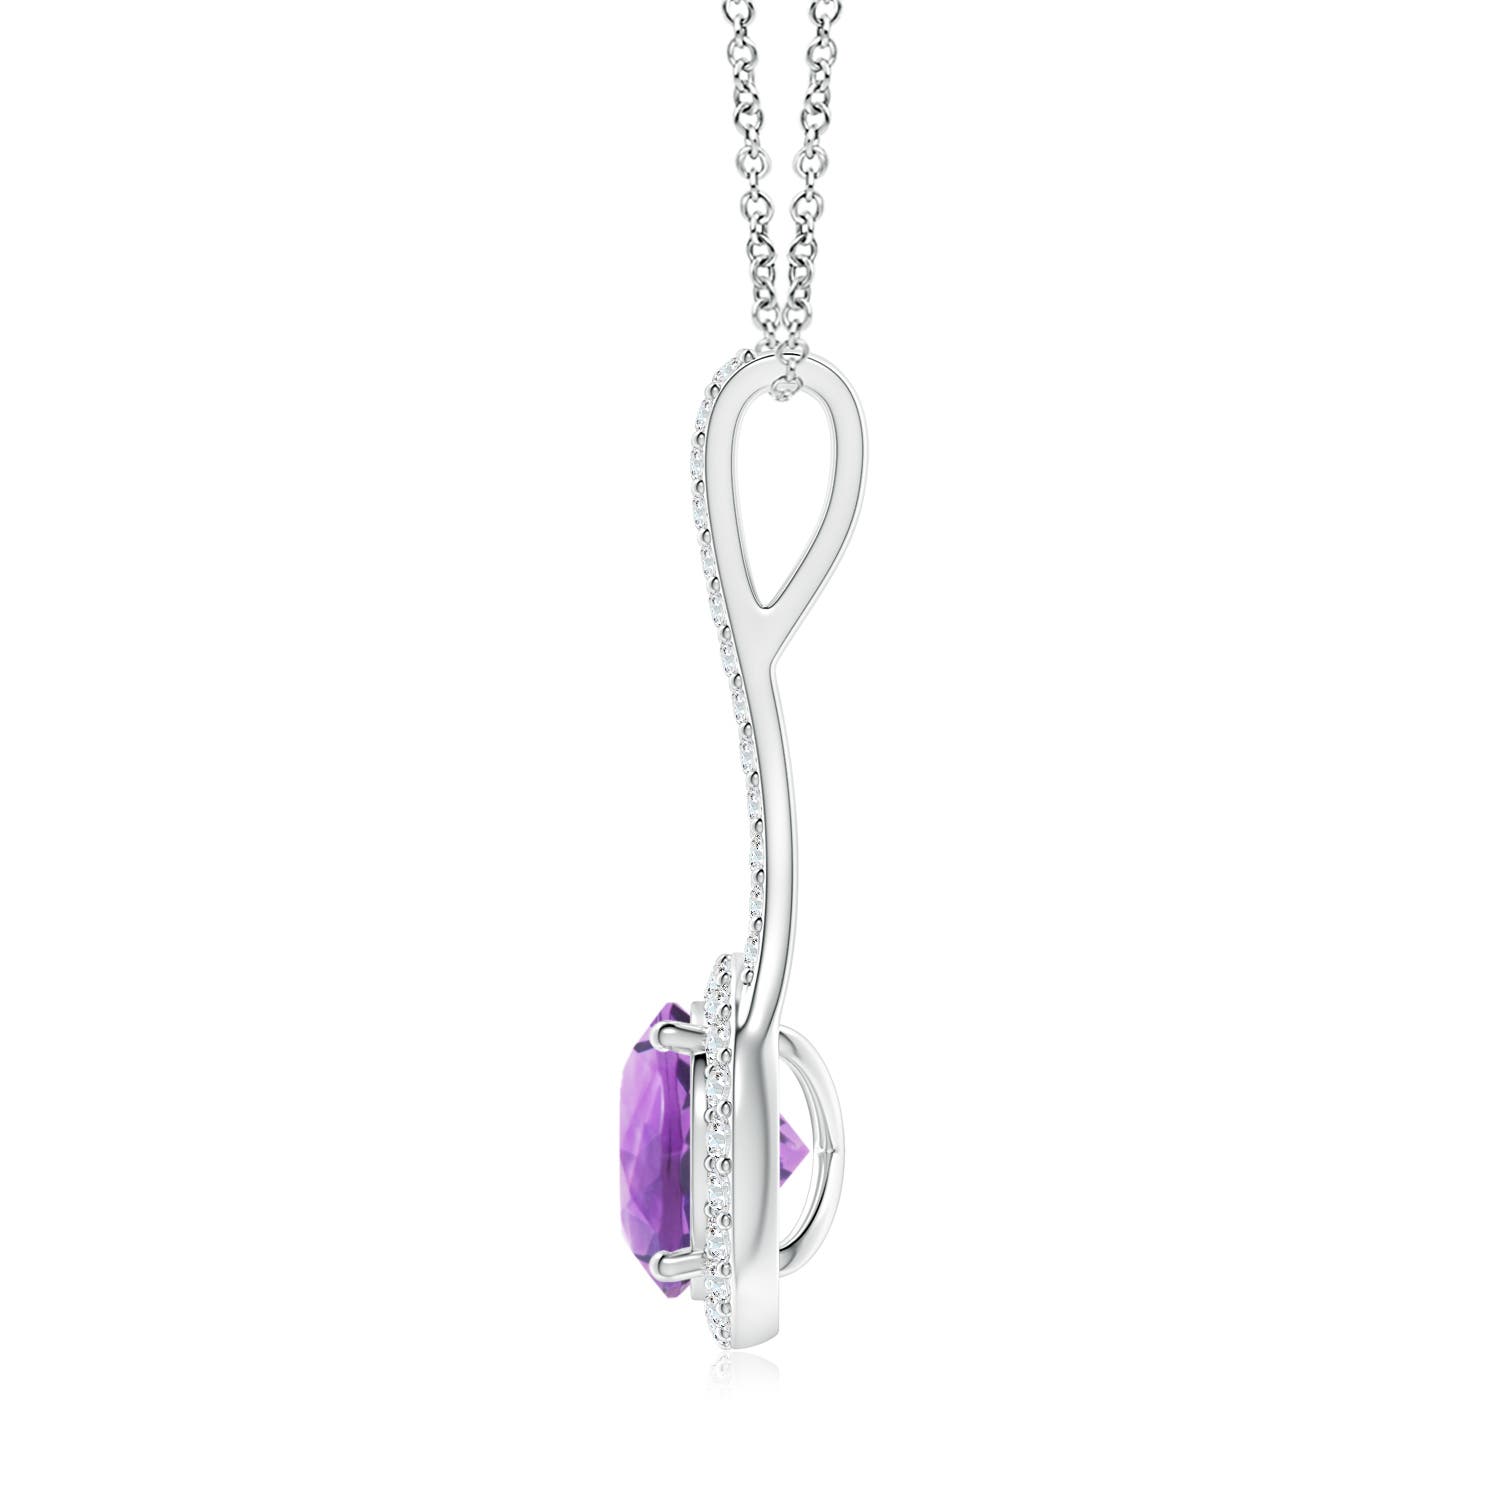 A - Amethyst / 2.08 CT / 14 KT White Gold